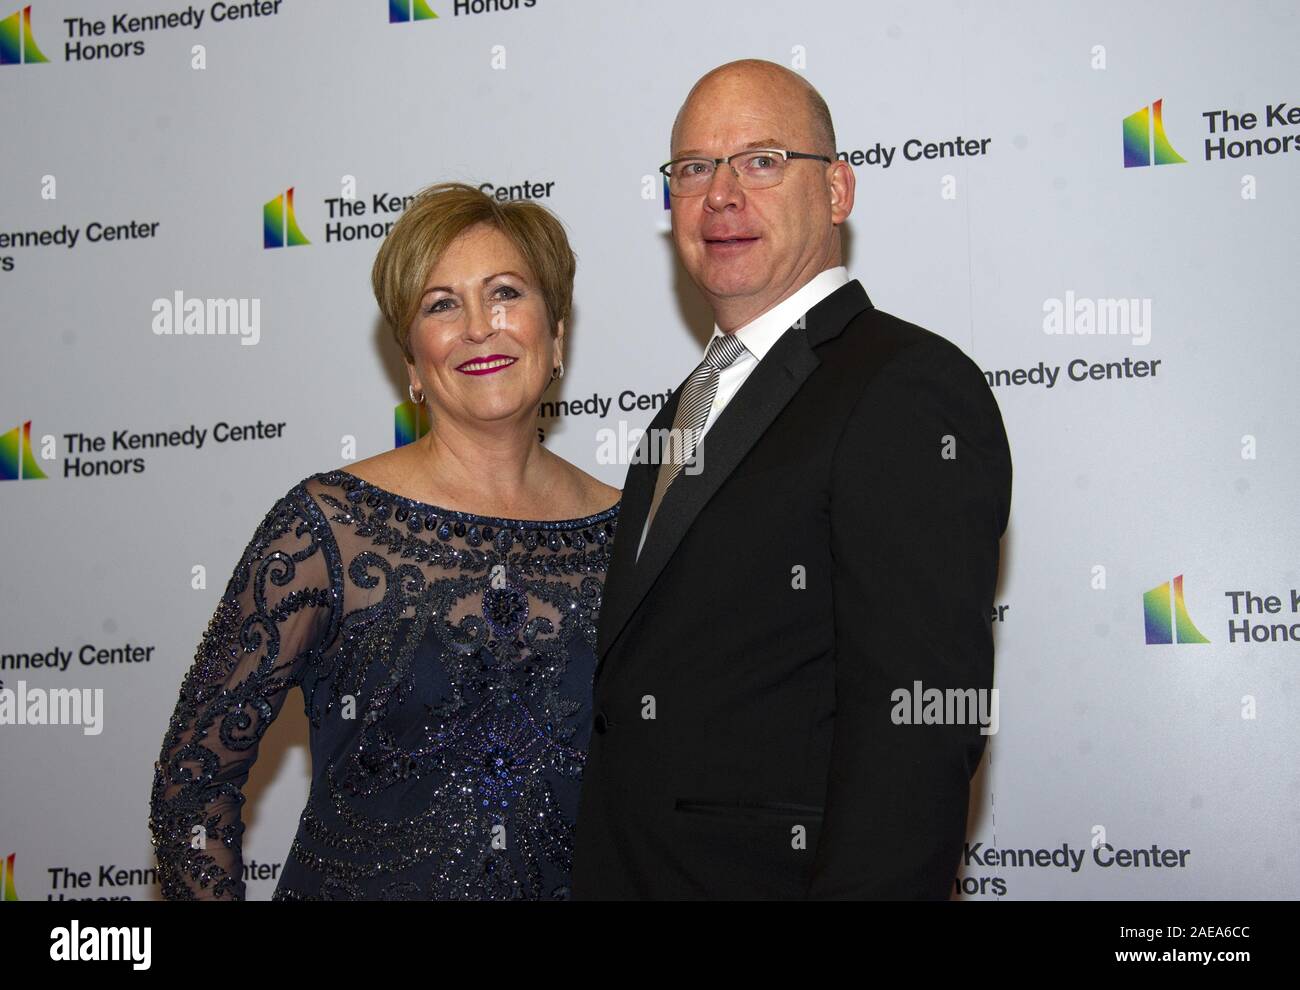 Washington, USA. 07th Dec, 2019. Deborah F. Rutter, President of the John F. Kennedy Center for the Performing Arts, and her husband, Peter Ellefson arrive for the formal Artist's Dinner honoring the recipients of the 42nd Annual Kennedy Center Honors at the USA Department of State in Washington, DC on Saturday, December 7, 2019. The 2019 honorees are: Earth, Wind & Fire, Sally Field, Linda Ronstadt, Sesame Street, and Michael Tilson Thomas. Photo by Ron Sachs/UPI Credit: UPI/Alamy Live News Stock Photo